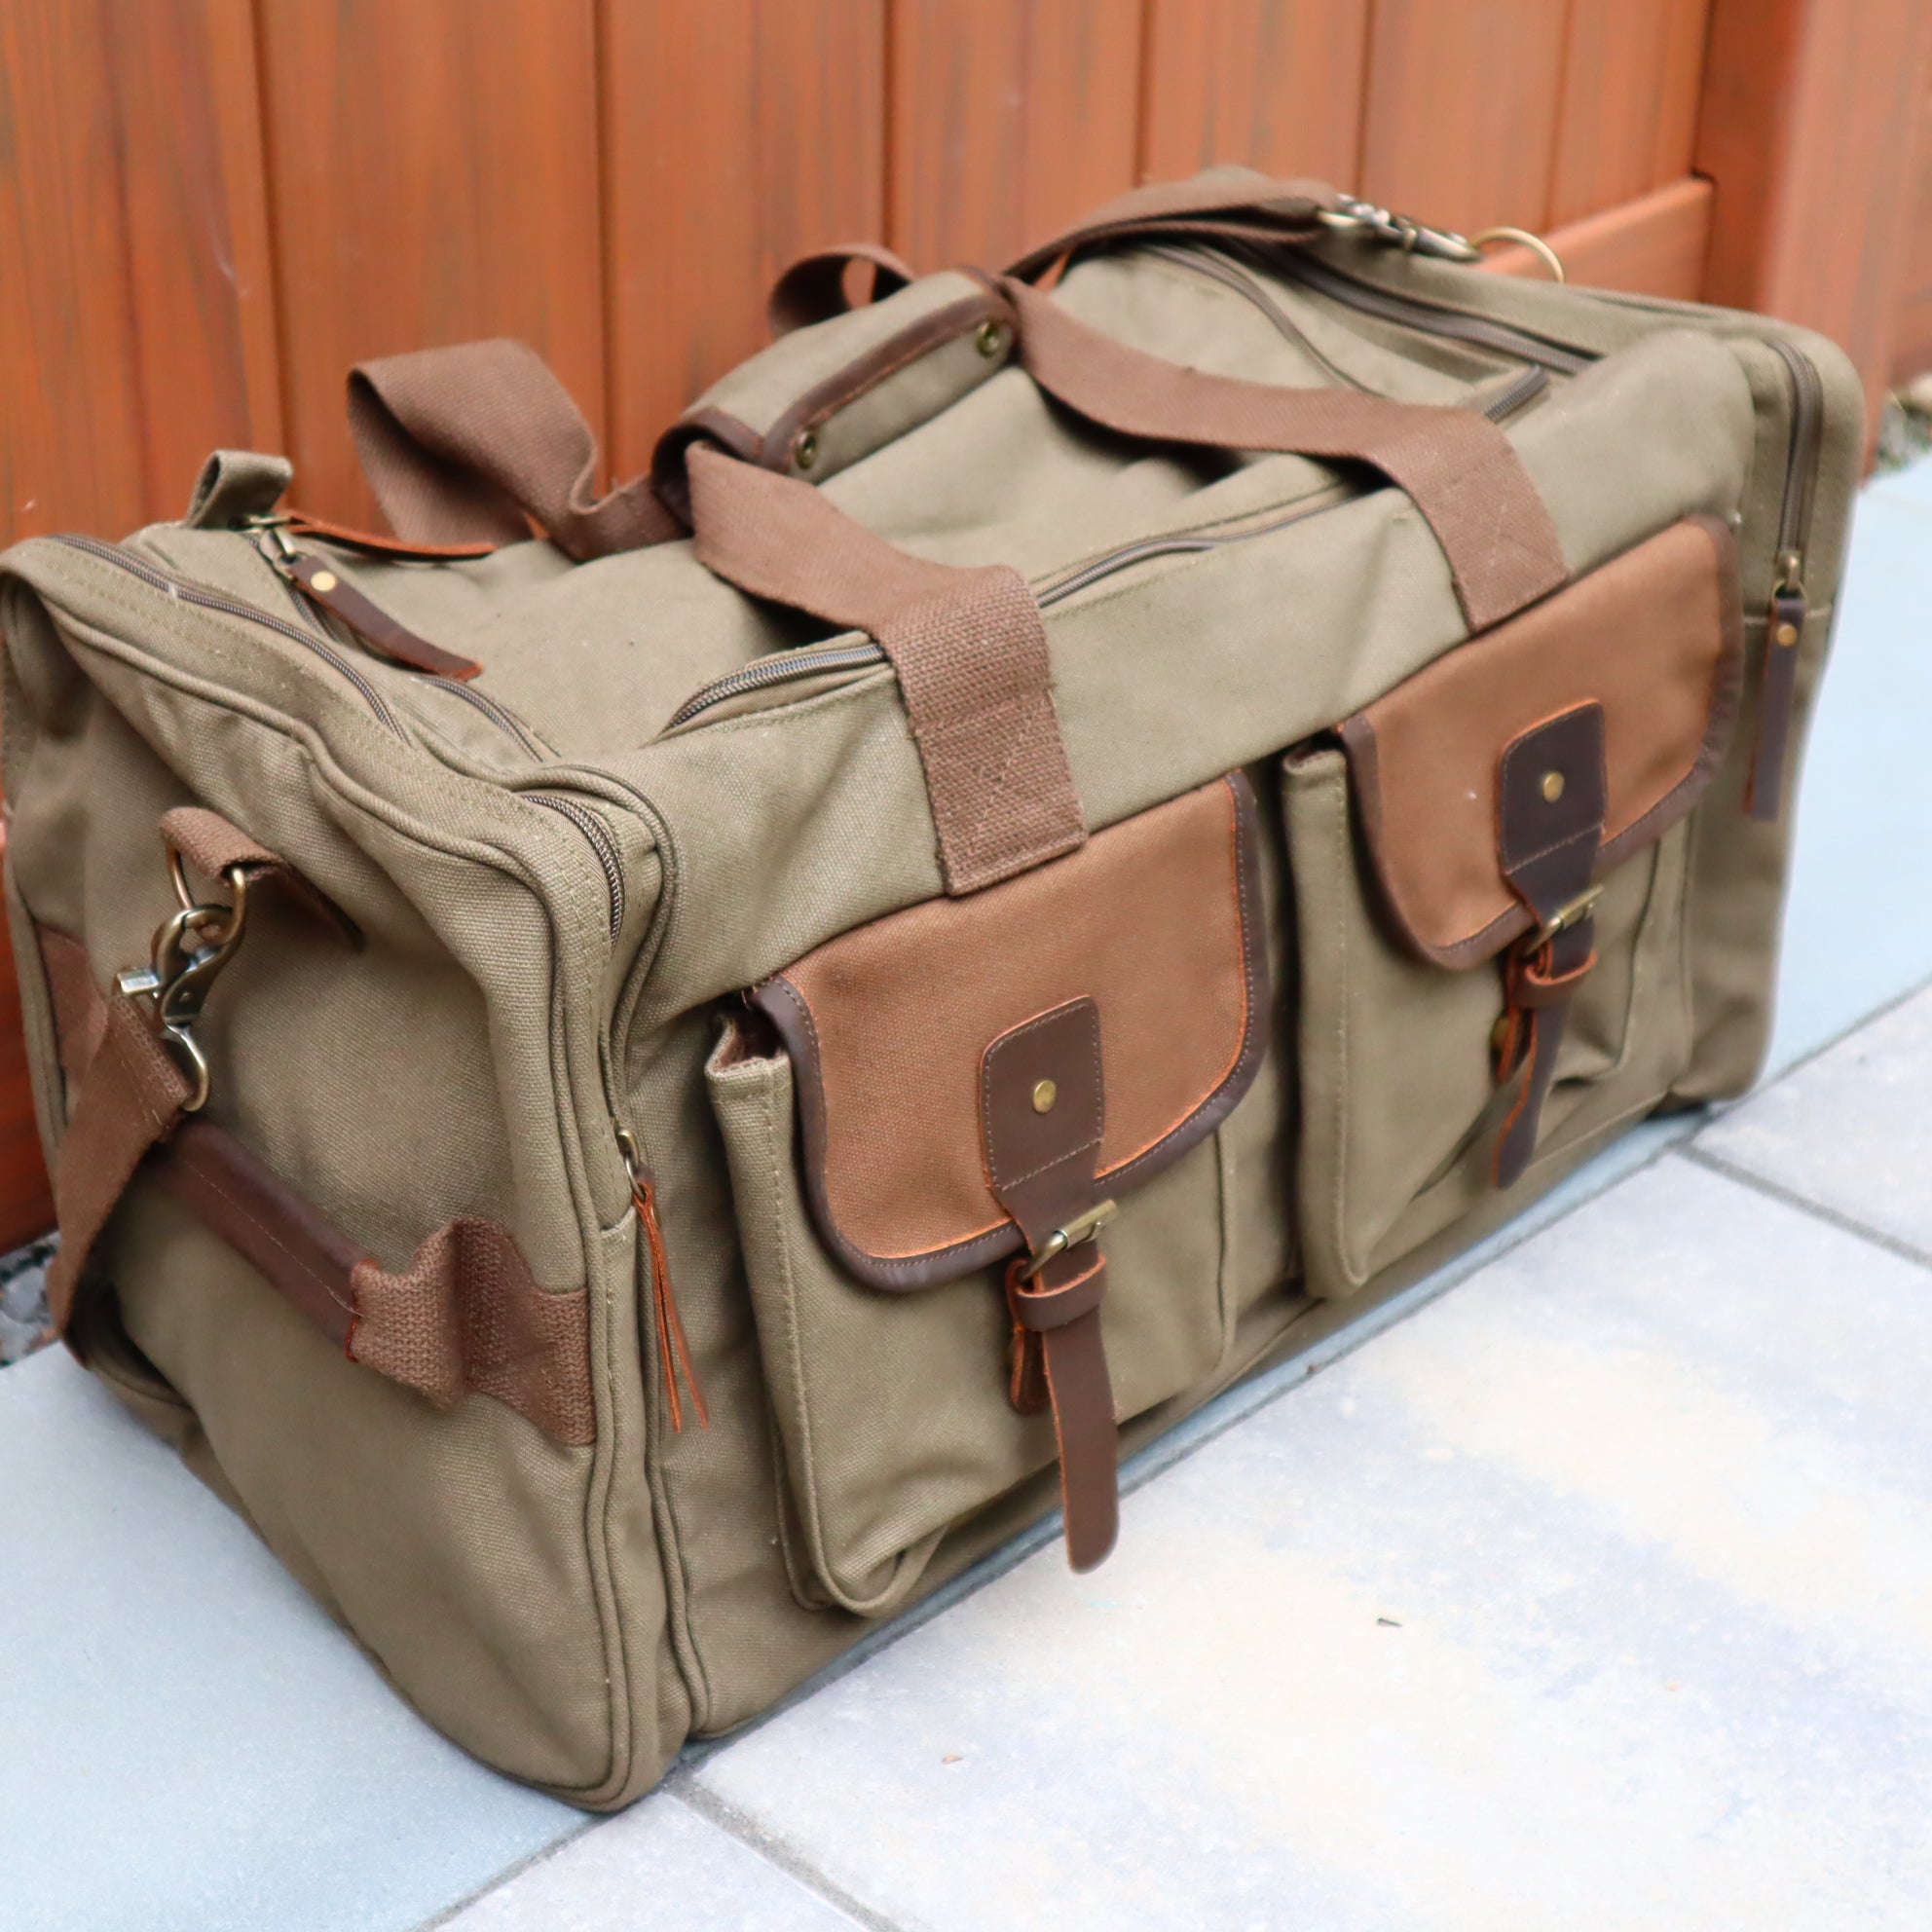 15 Best Personalized Duffle Bags for Men - GroomsDay